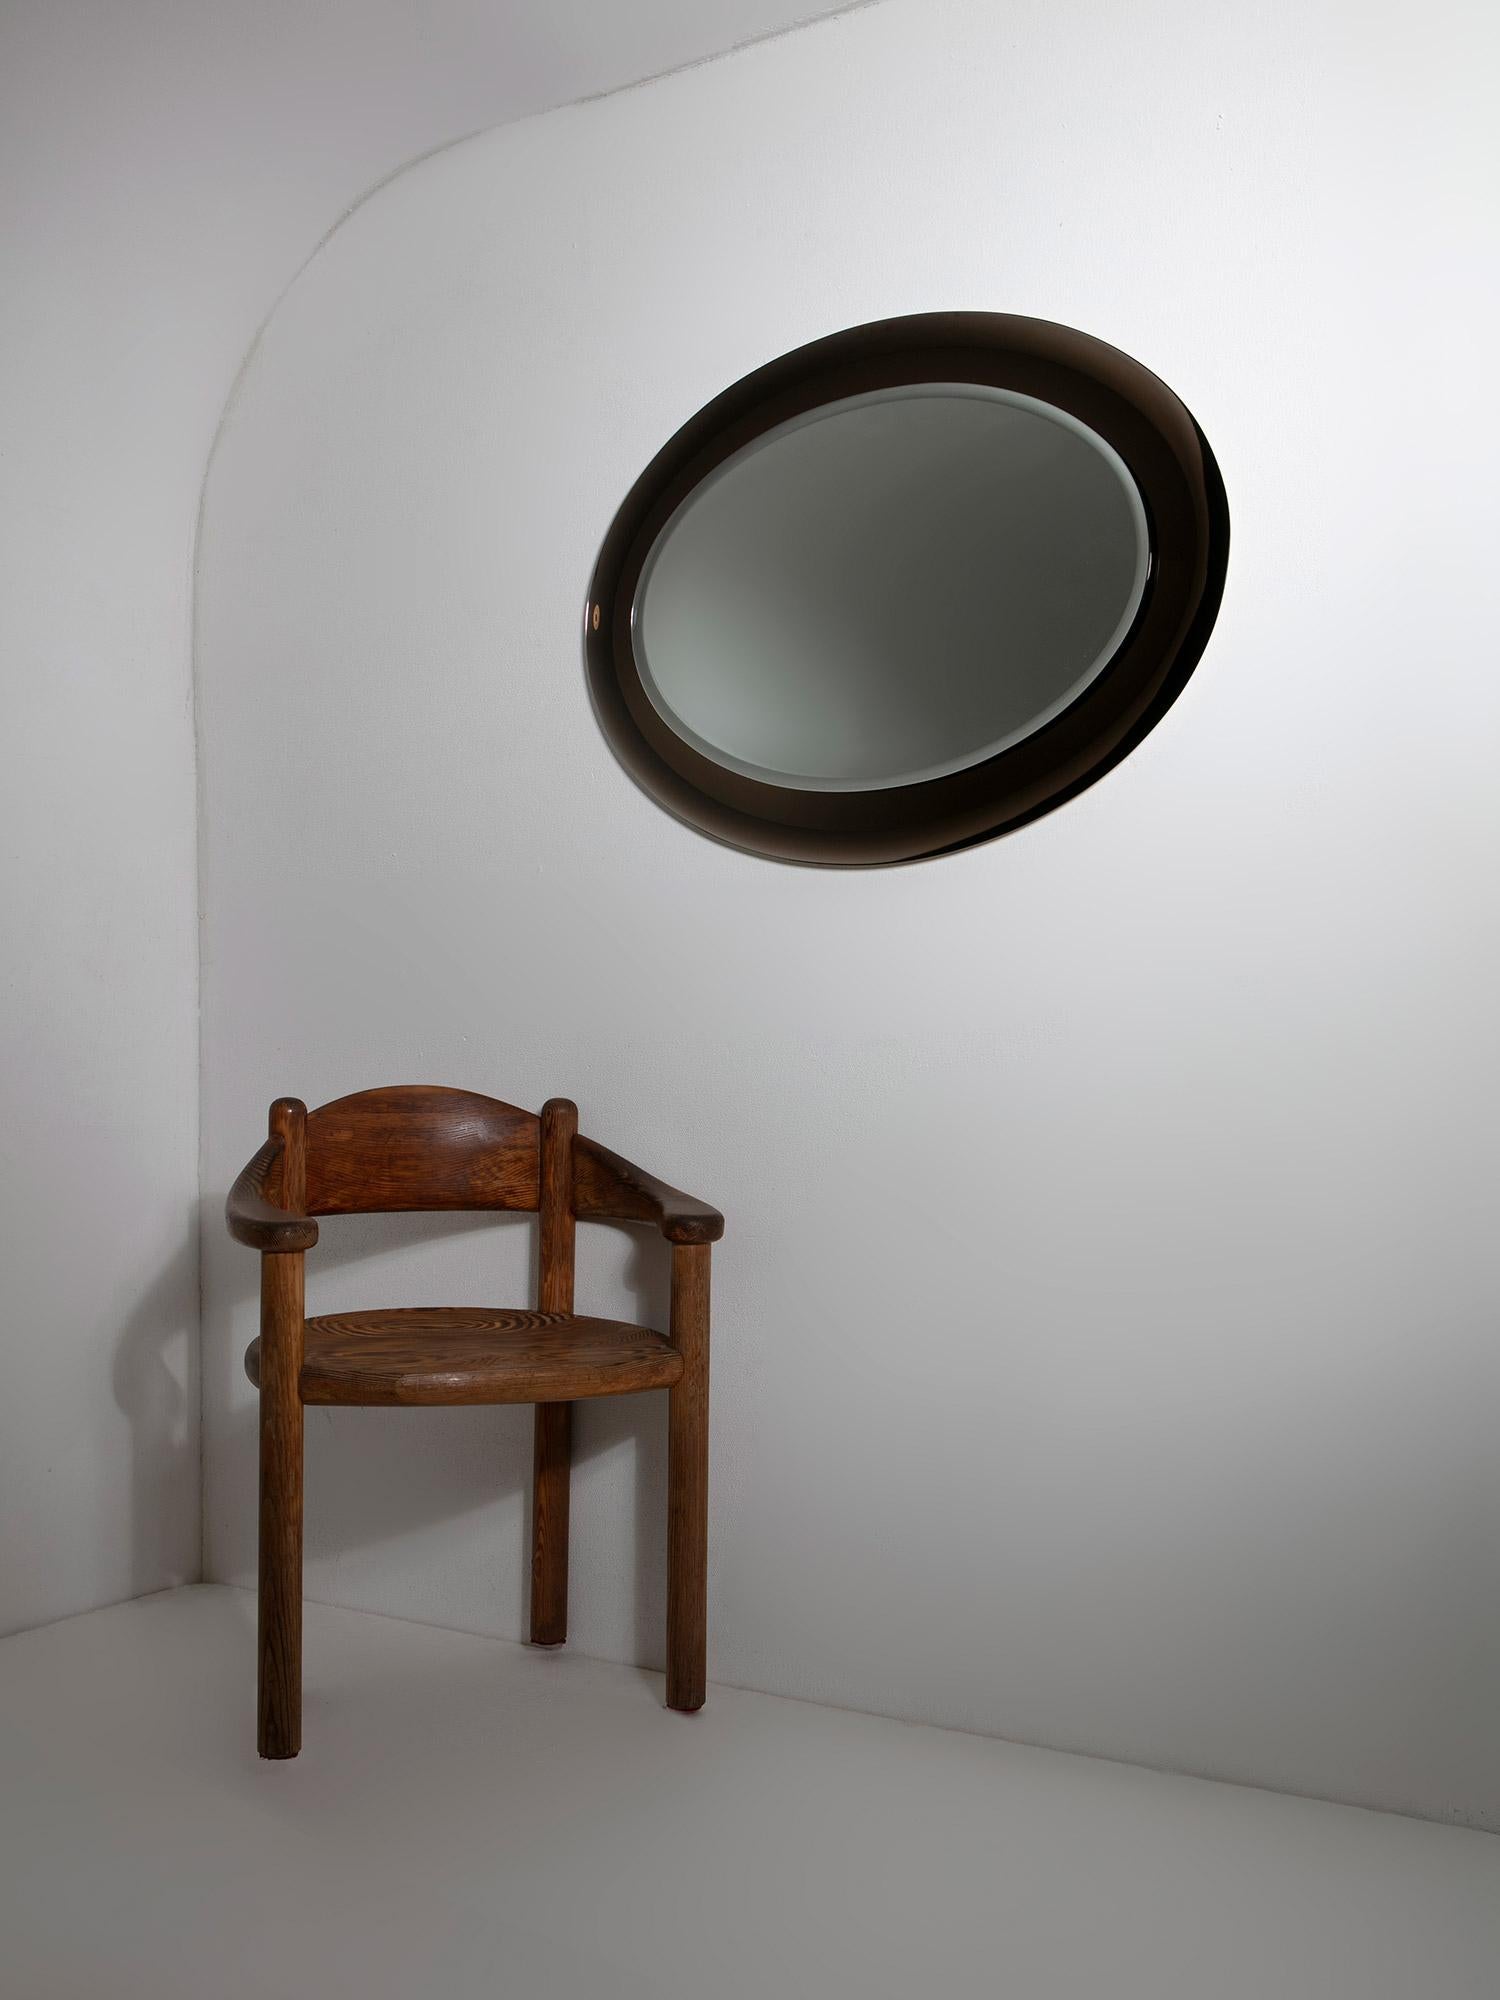 Large Double Bevelled Oval Wall Mirror, Metalvetro Galvorame, Italy, 1970s For Sale 1